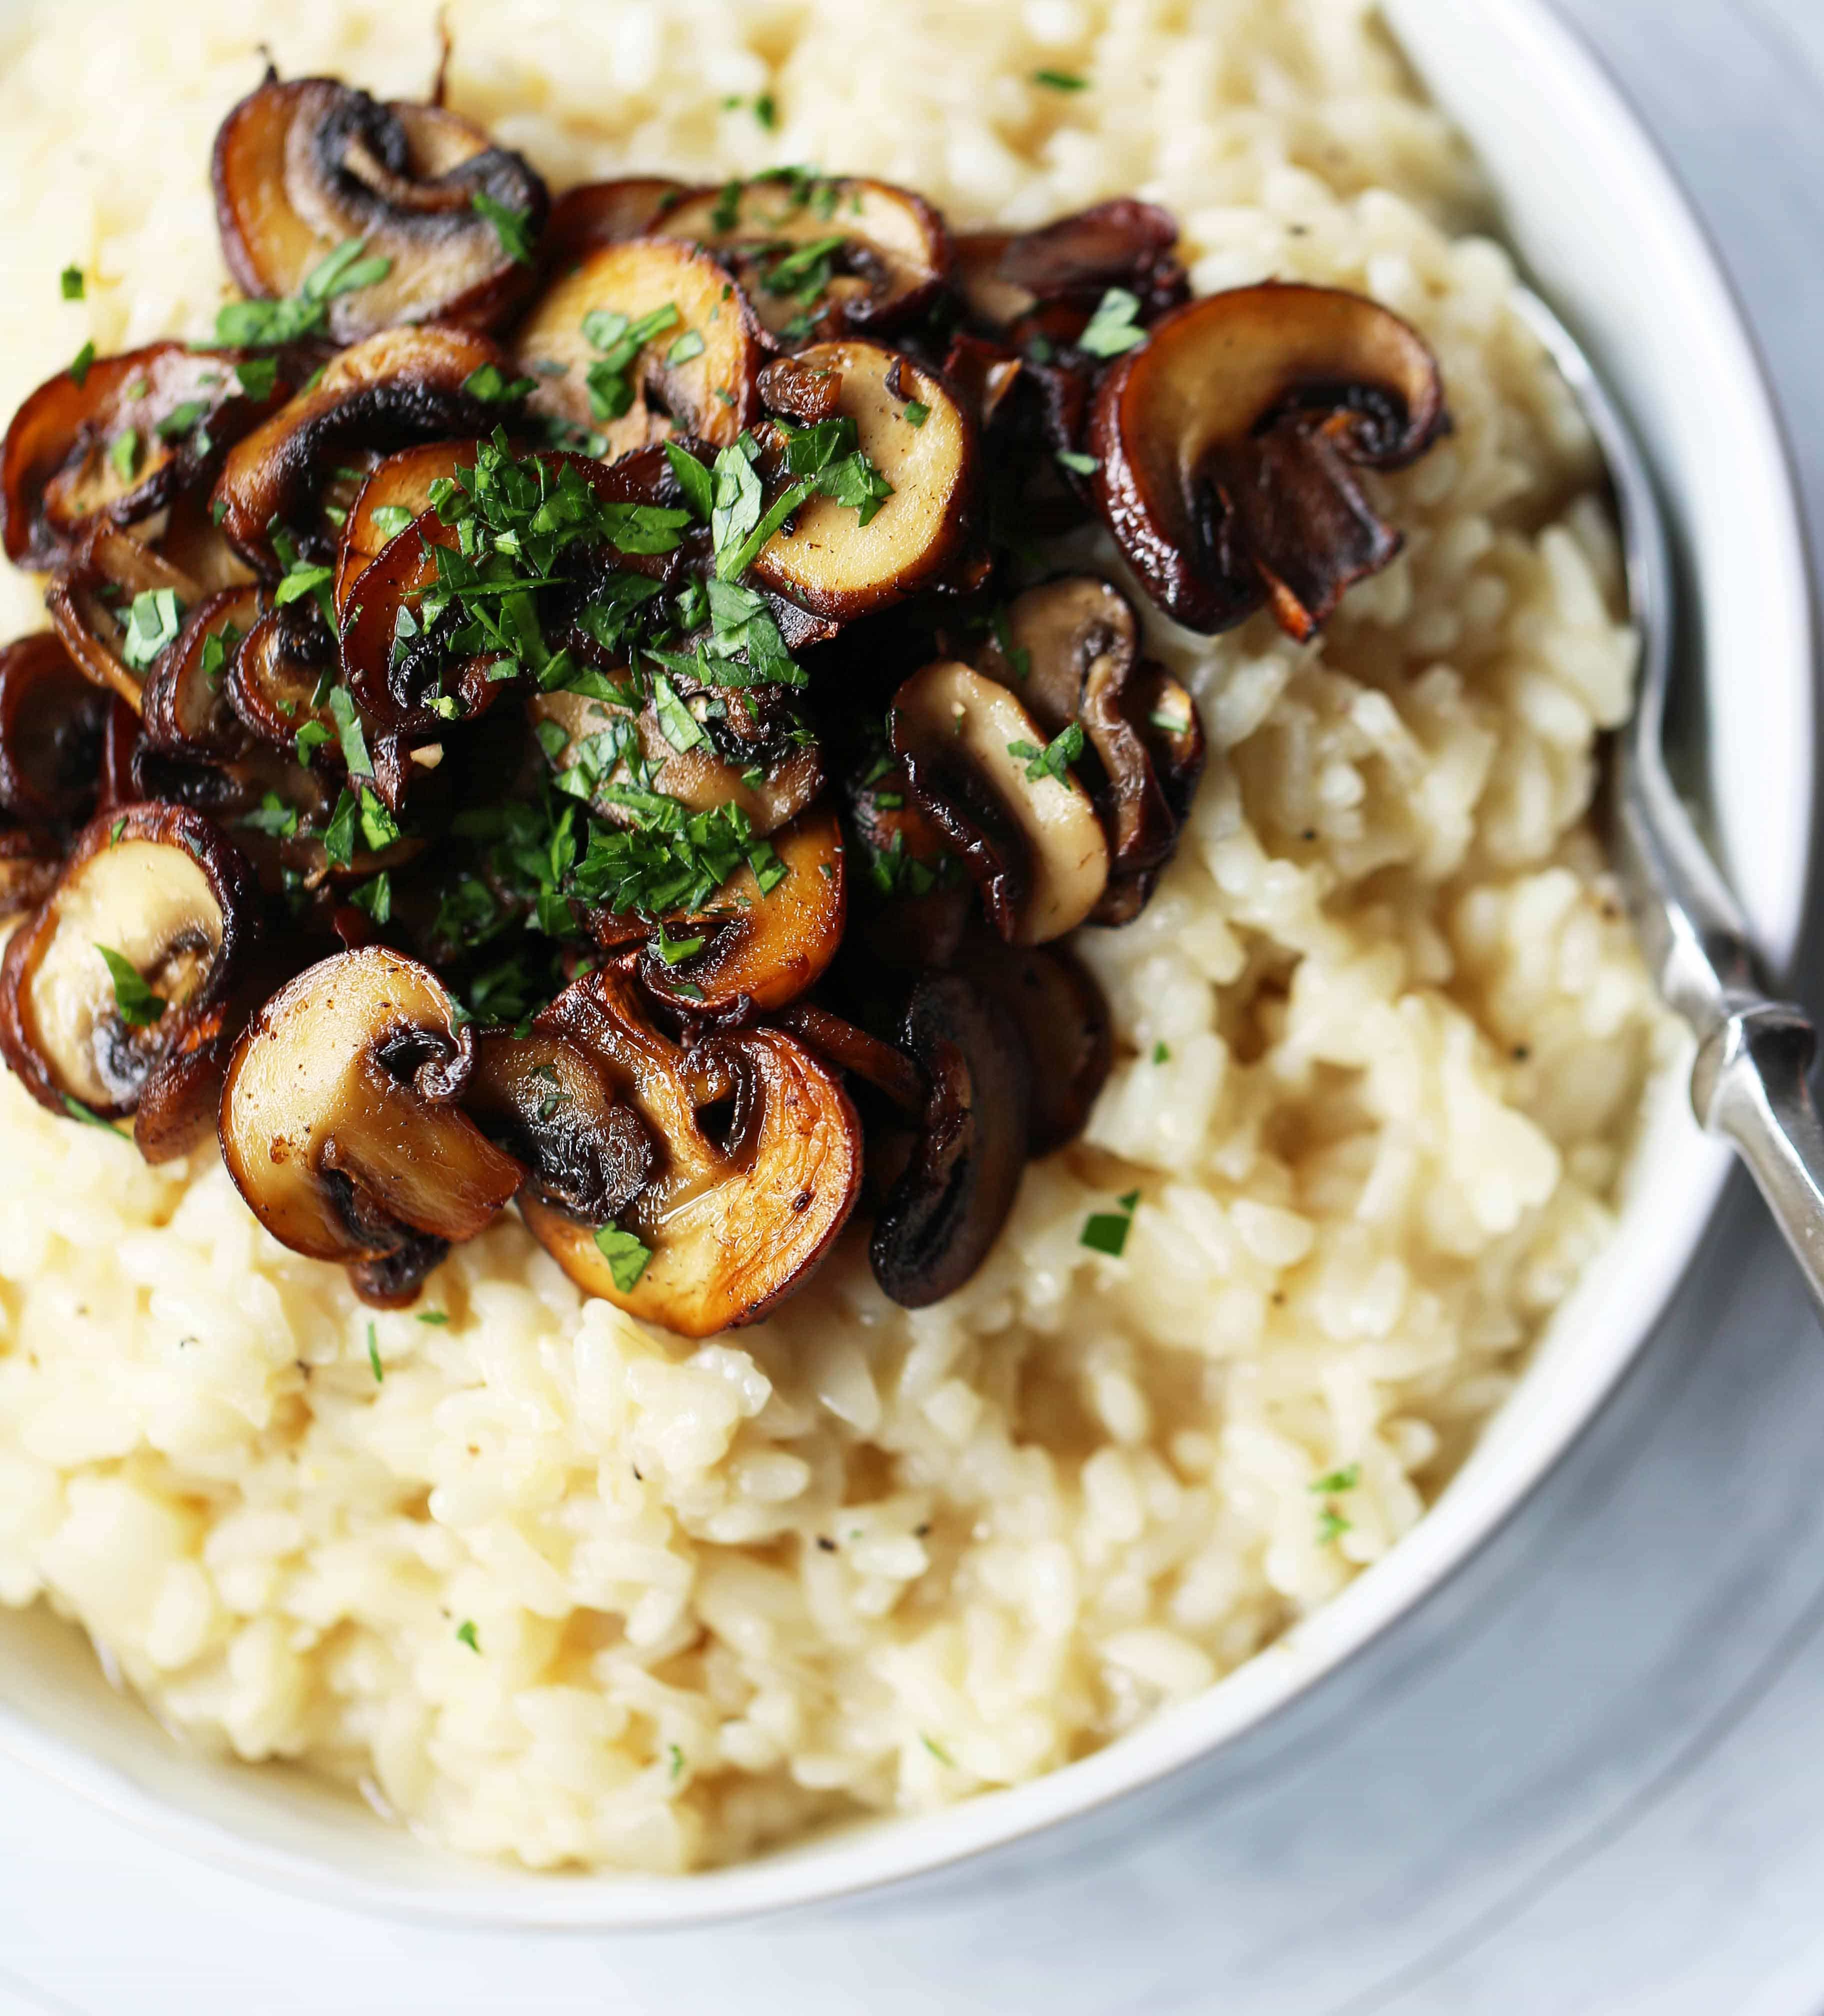 Creamy Mushroom Risotto. Rich, creamy rice slowly simmered with chicken broth, butter, parmesan cheese, and topped with butter sauteed mushrooms. www.modernhoney.com #risotto #homemaderisotto #mushroomrisotto